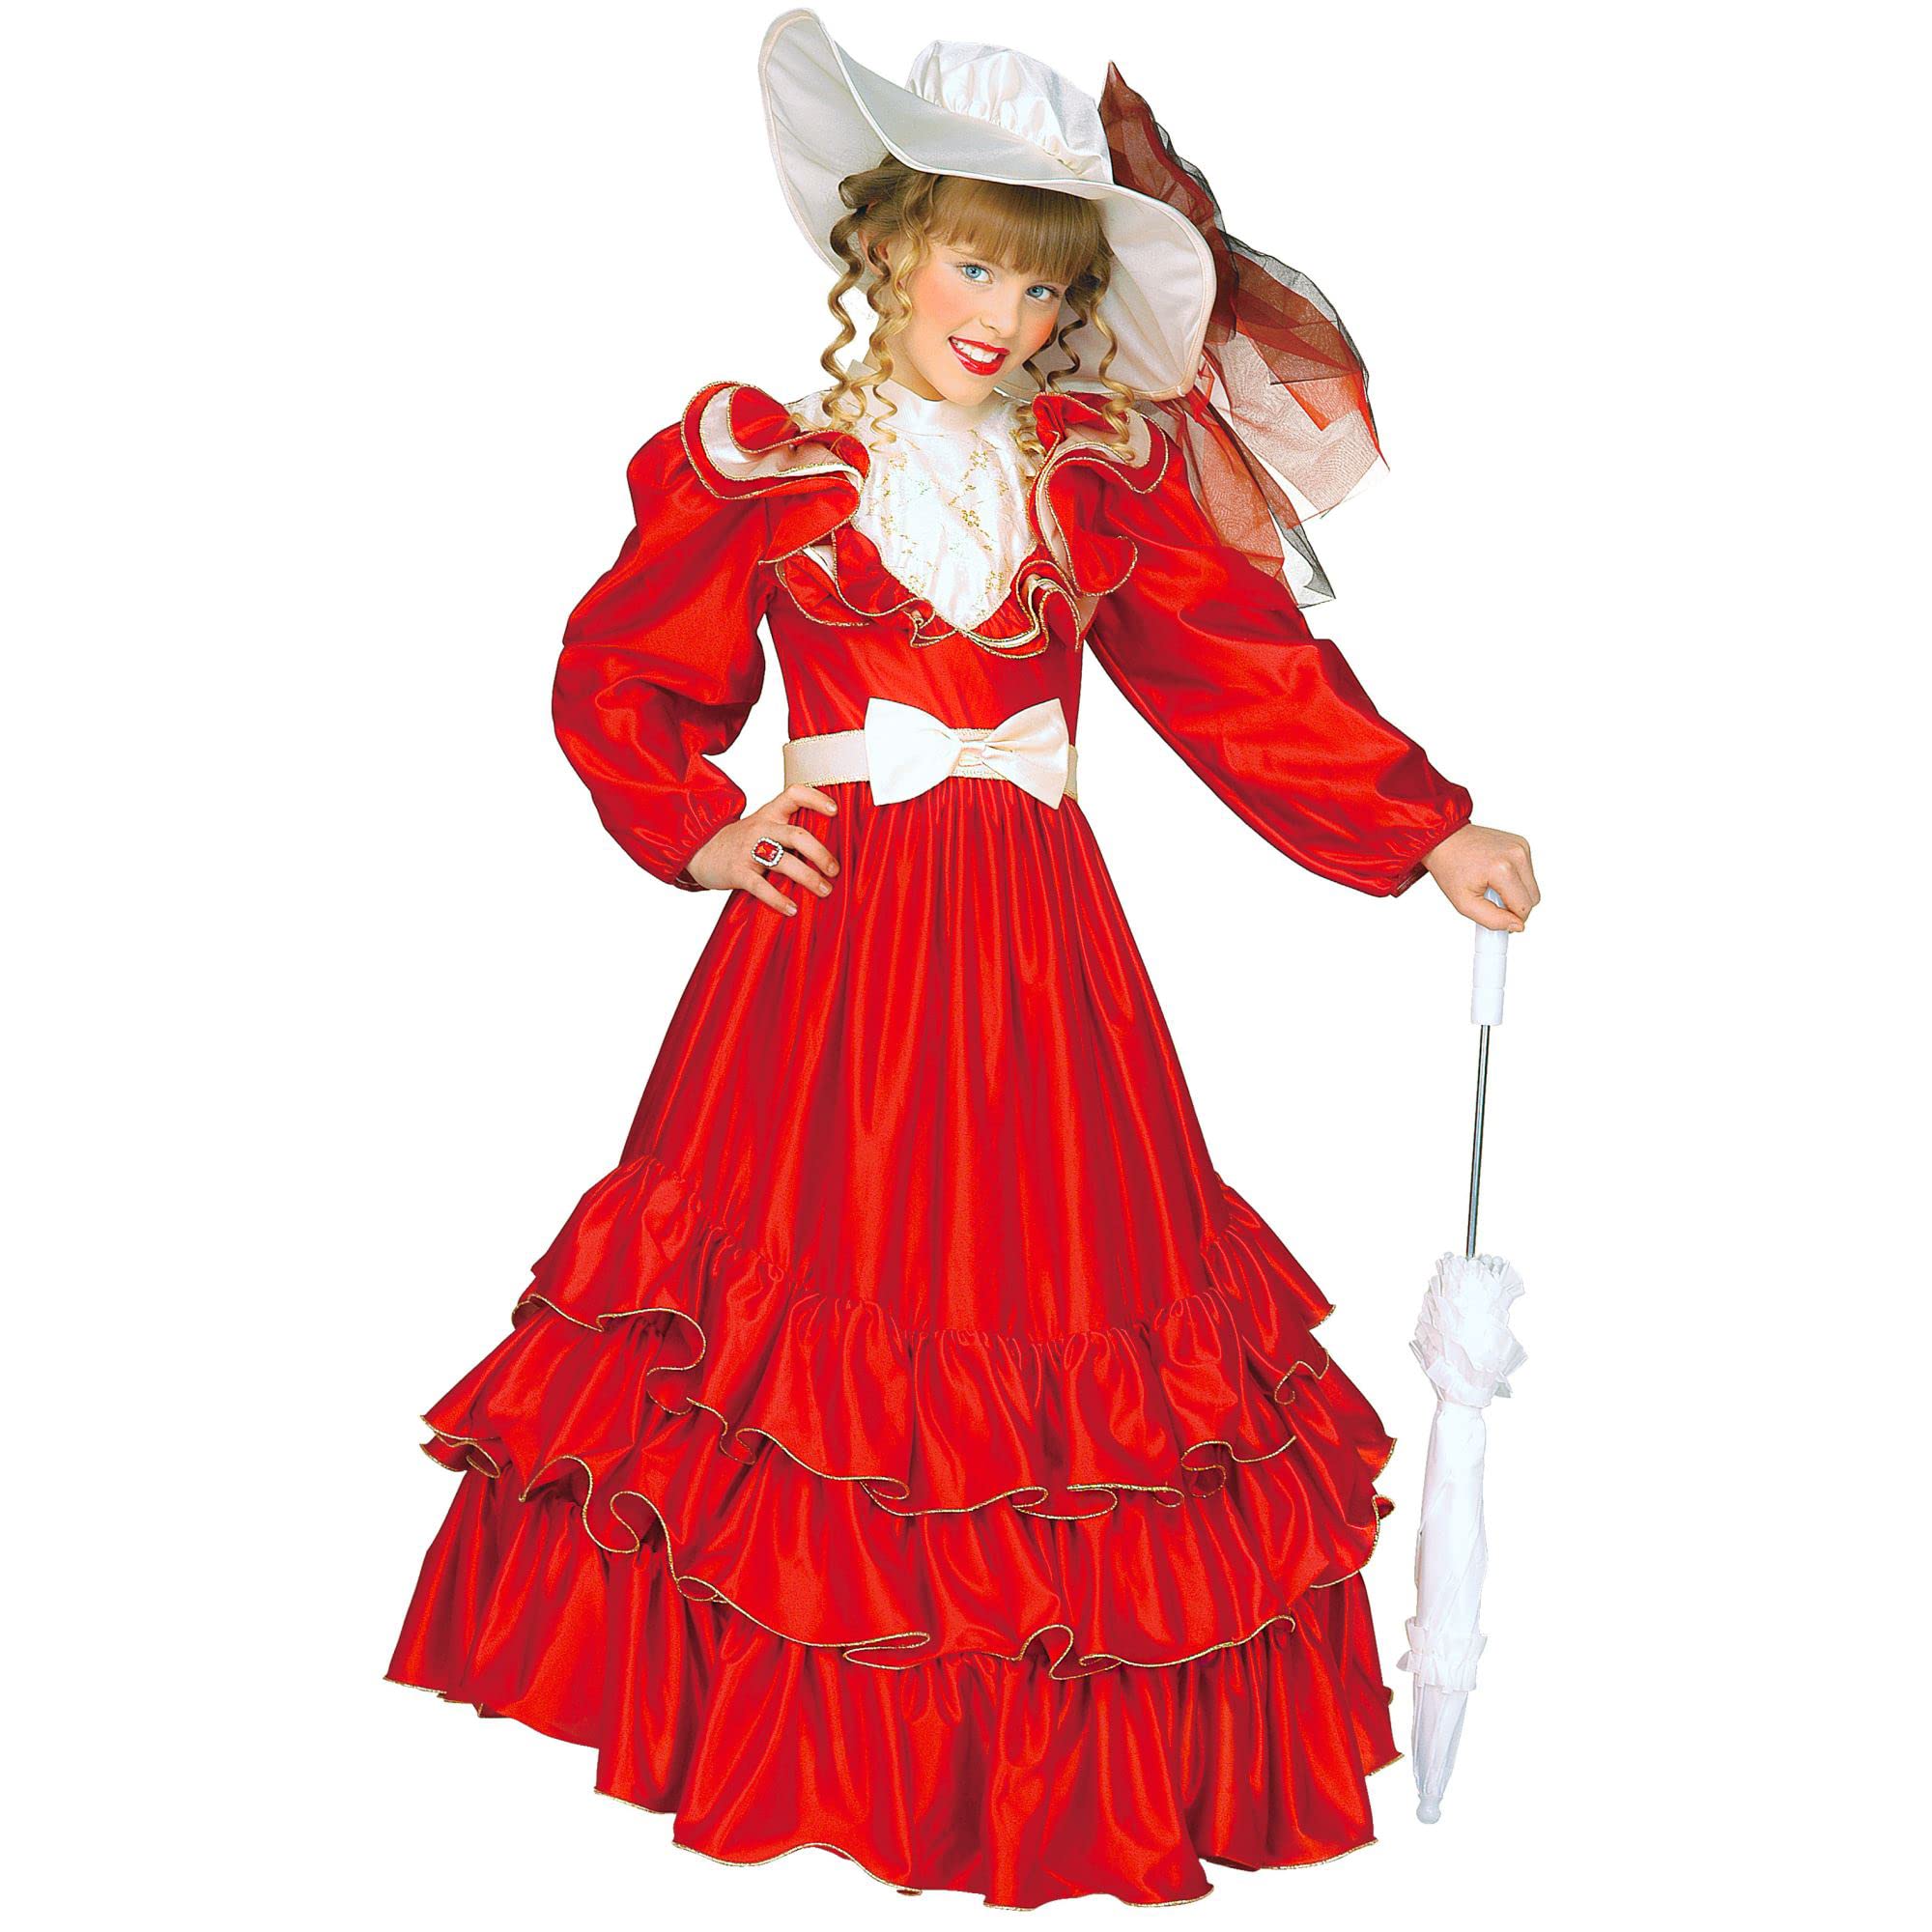 "CLEMENTINA" (dress with wire hoop, ribbon belt, hat) - (158 cm / 11-13 Years)